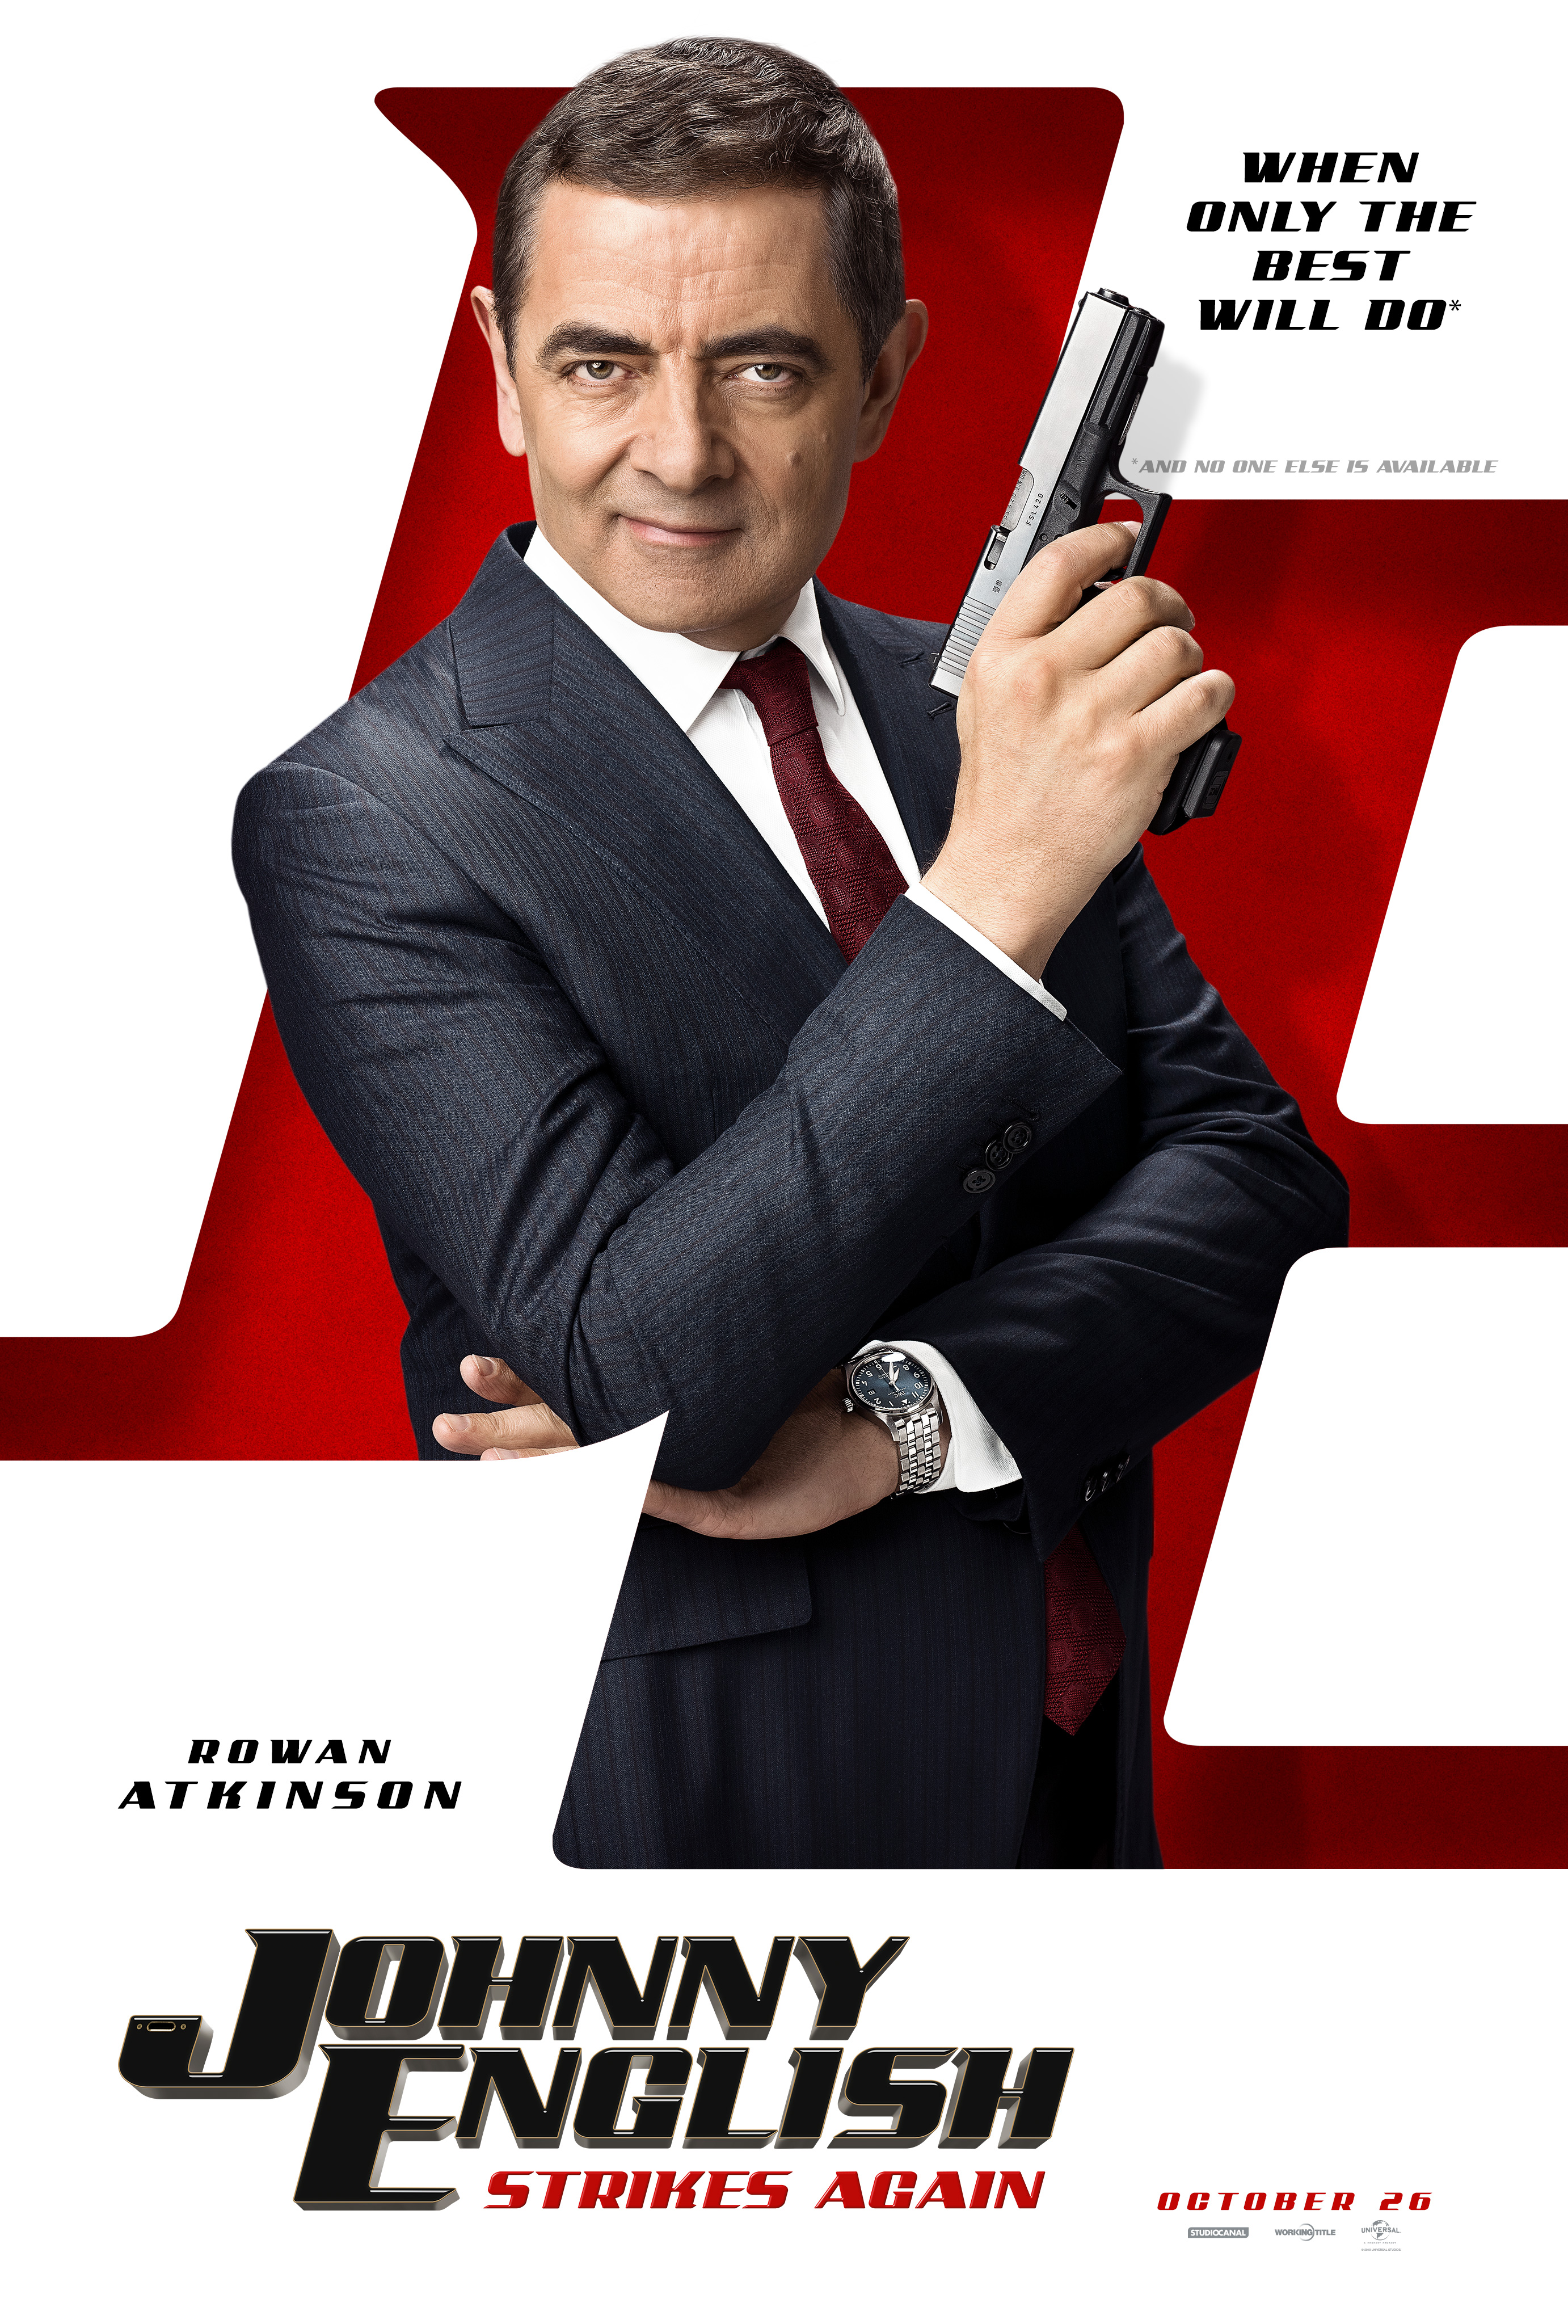 Johnny English Strikes Again poster (Universal Pictures)